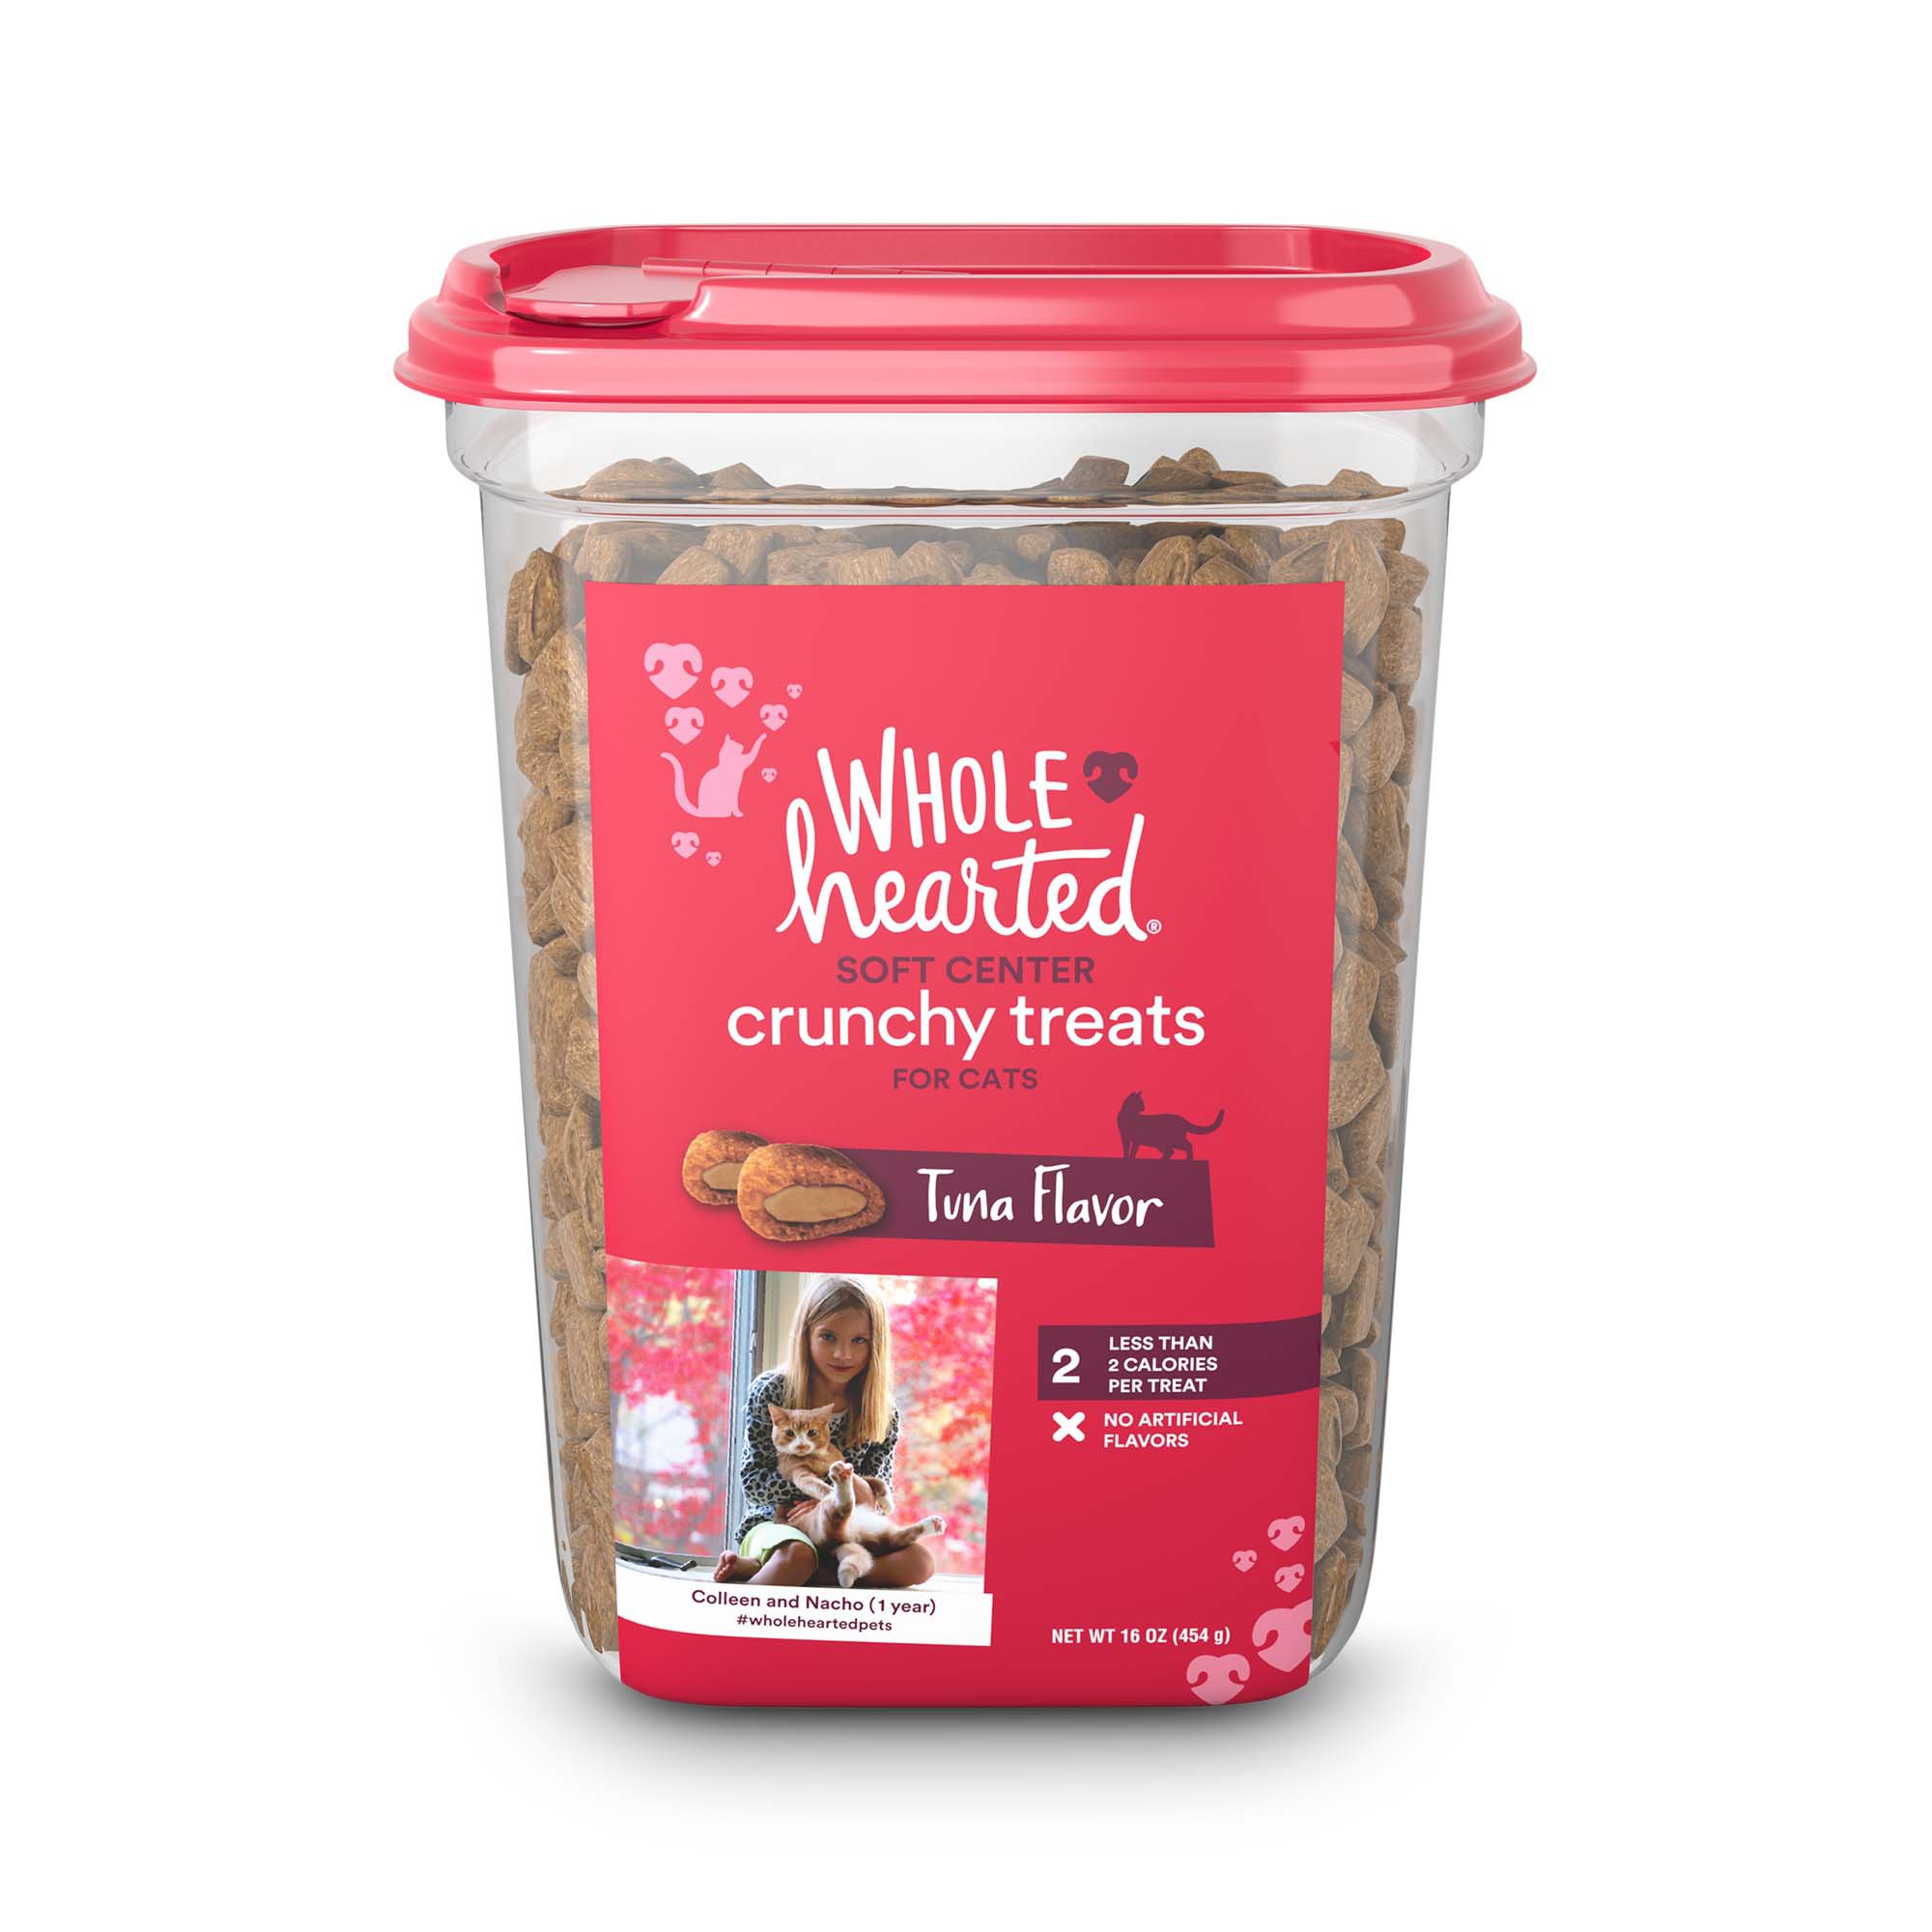 WholeHearted Soft Center Crunchy Tuna Flavor Treats for Cats Petco